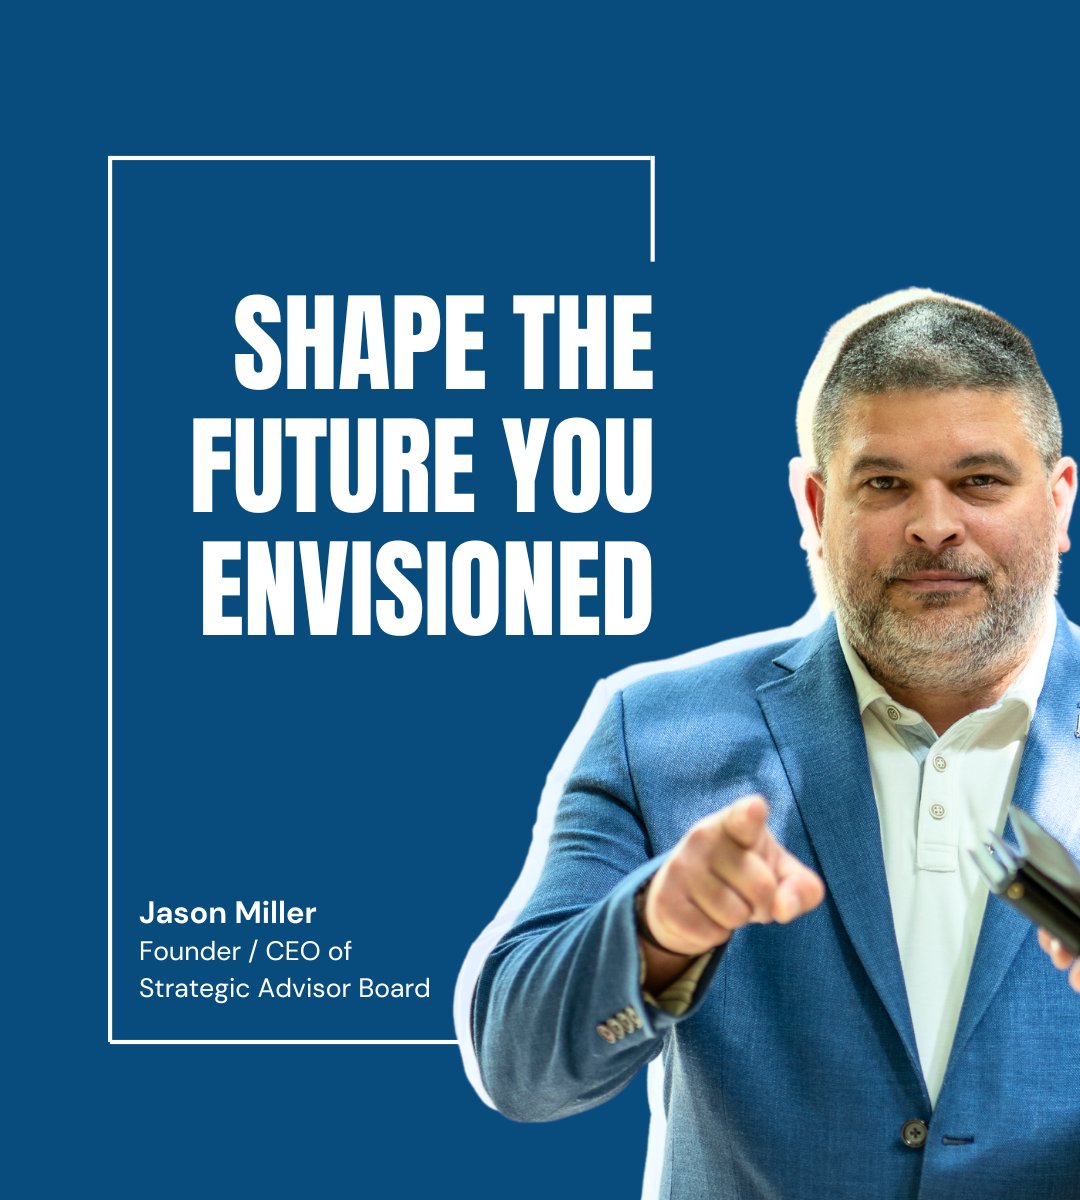 In today's rapidly changing world, shaping the future you envision is not just a dream, but a necessary pursuit.

#ShapeTheFuture #VisionaryLeadership #InnovateAndServe #CreateTomorrow